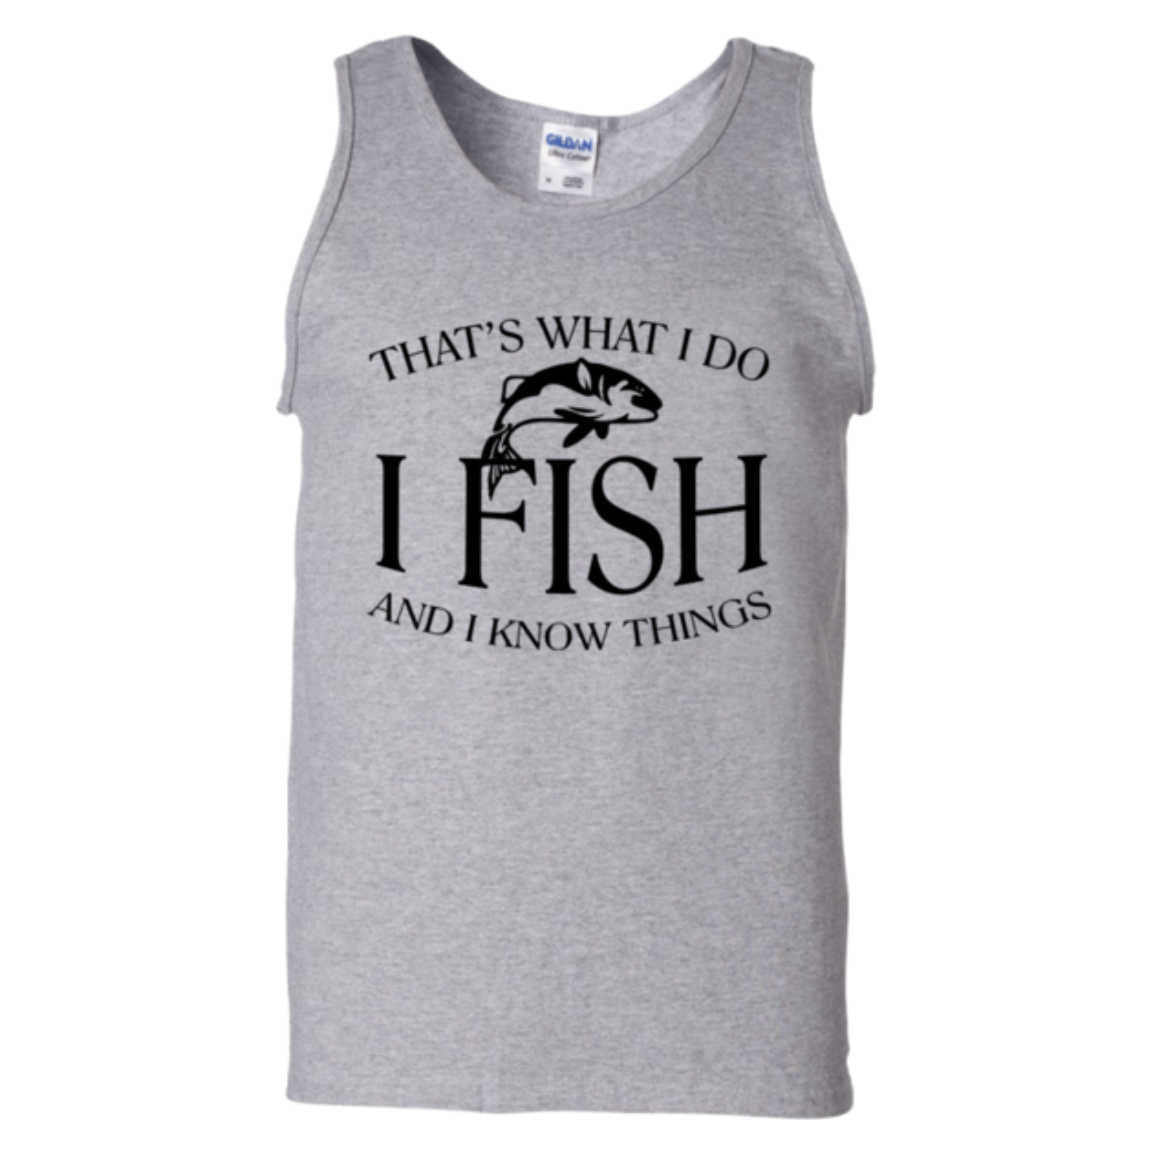 That's what i do i fish and i know things tank top sport grey a